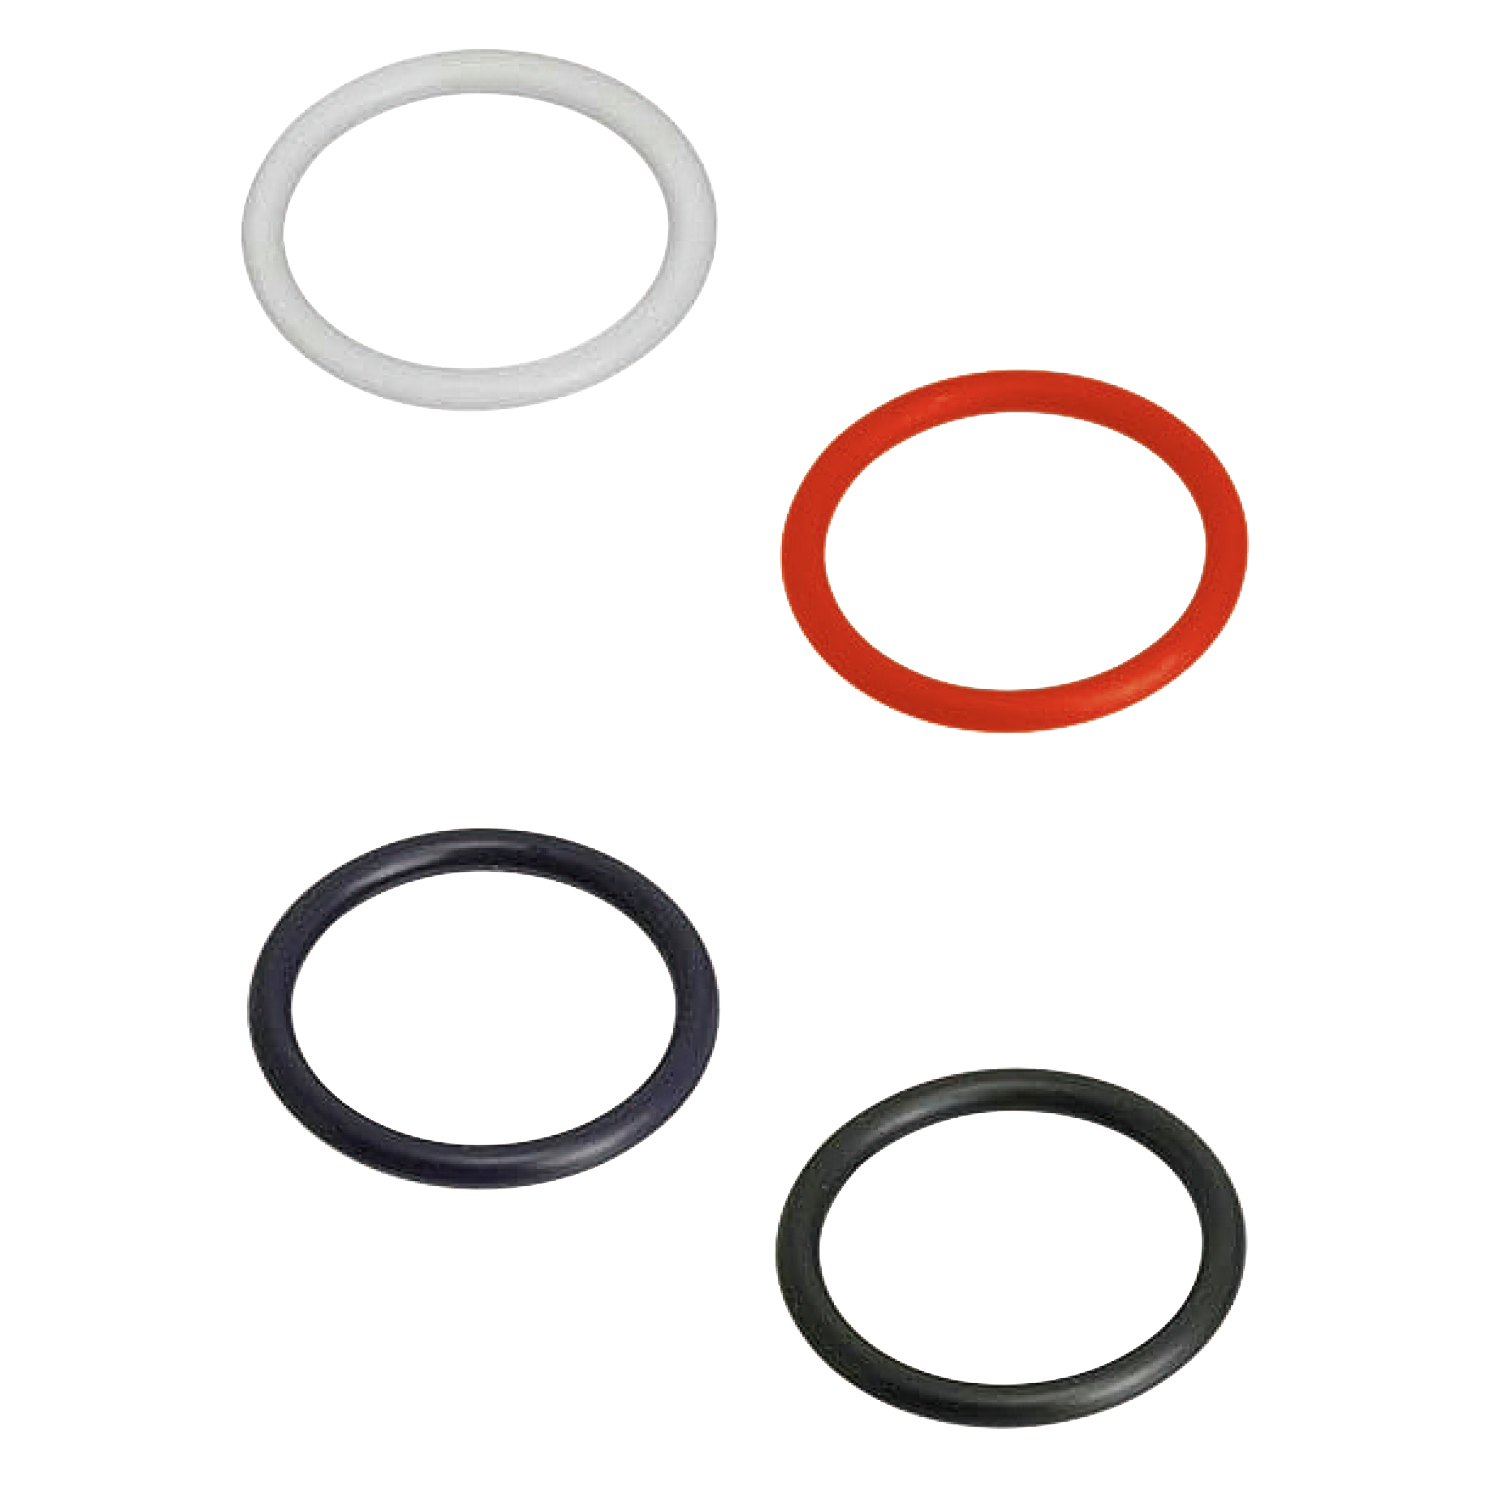 NGF120, O-Rings - for Static Applications, G Series, MISUMI